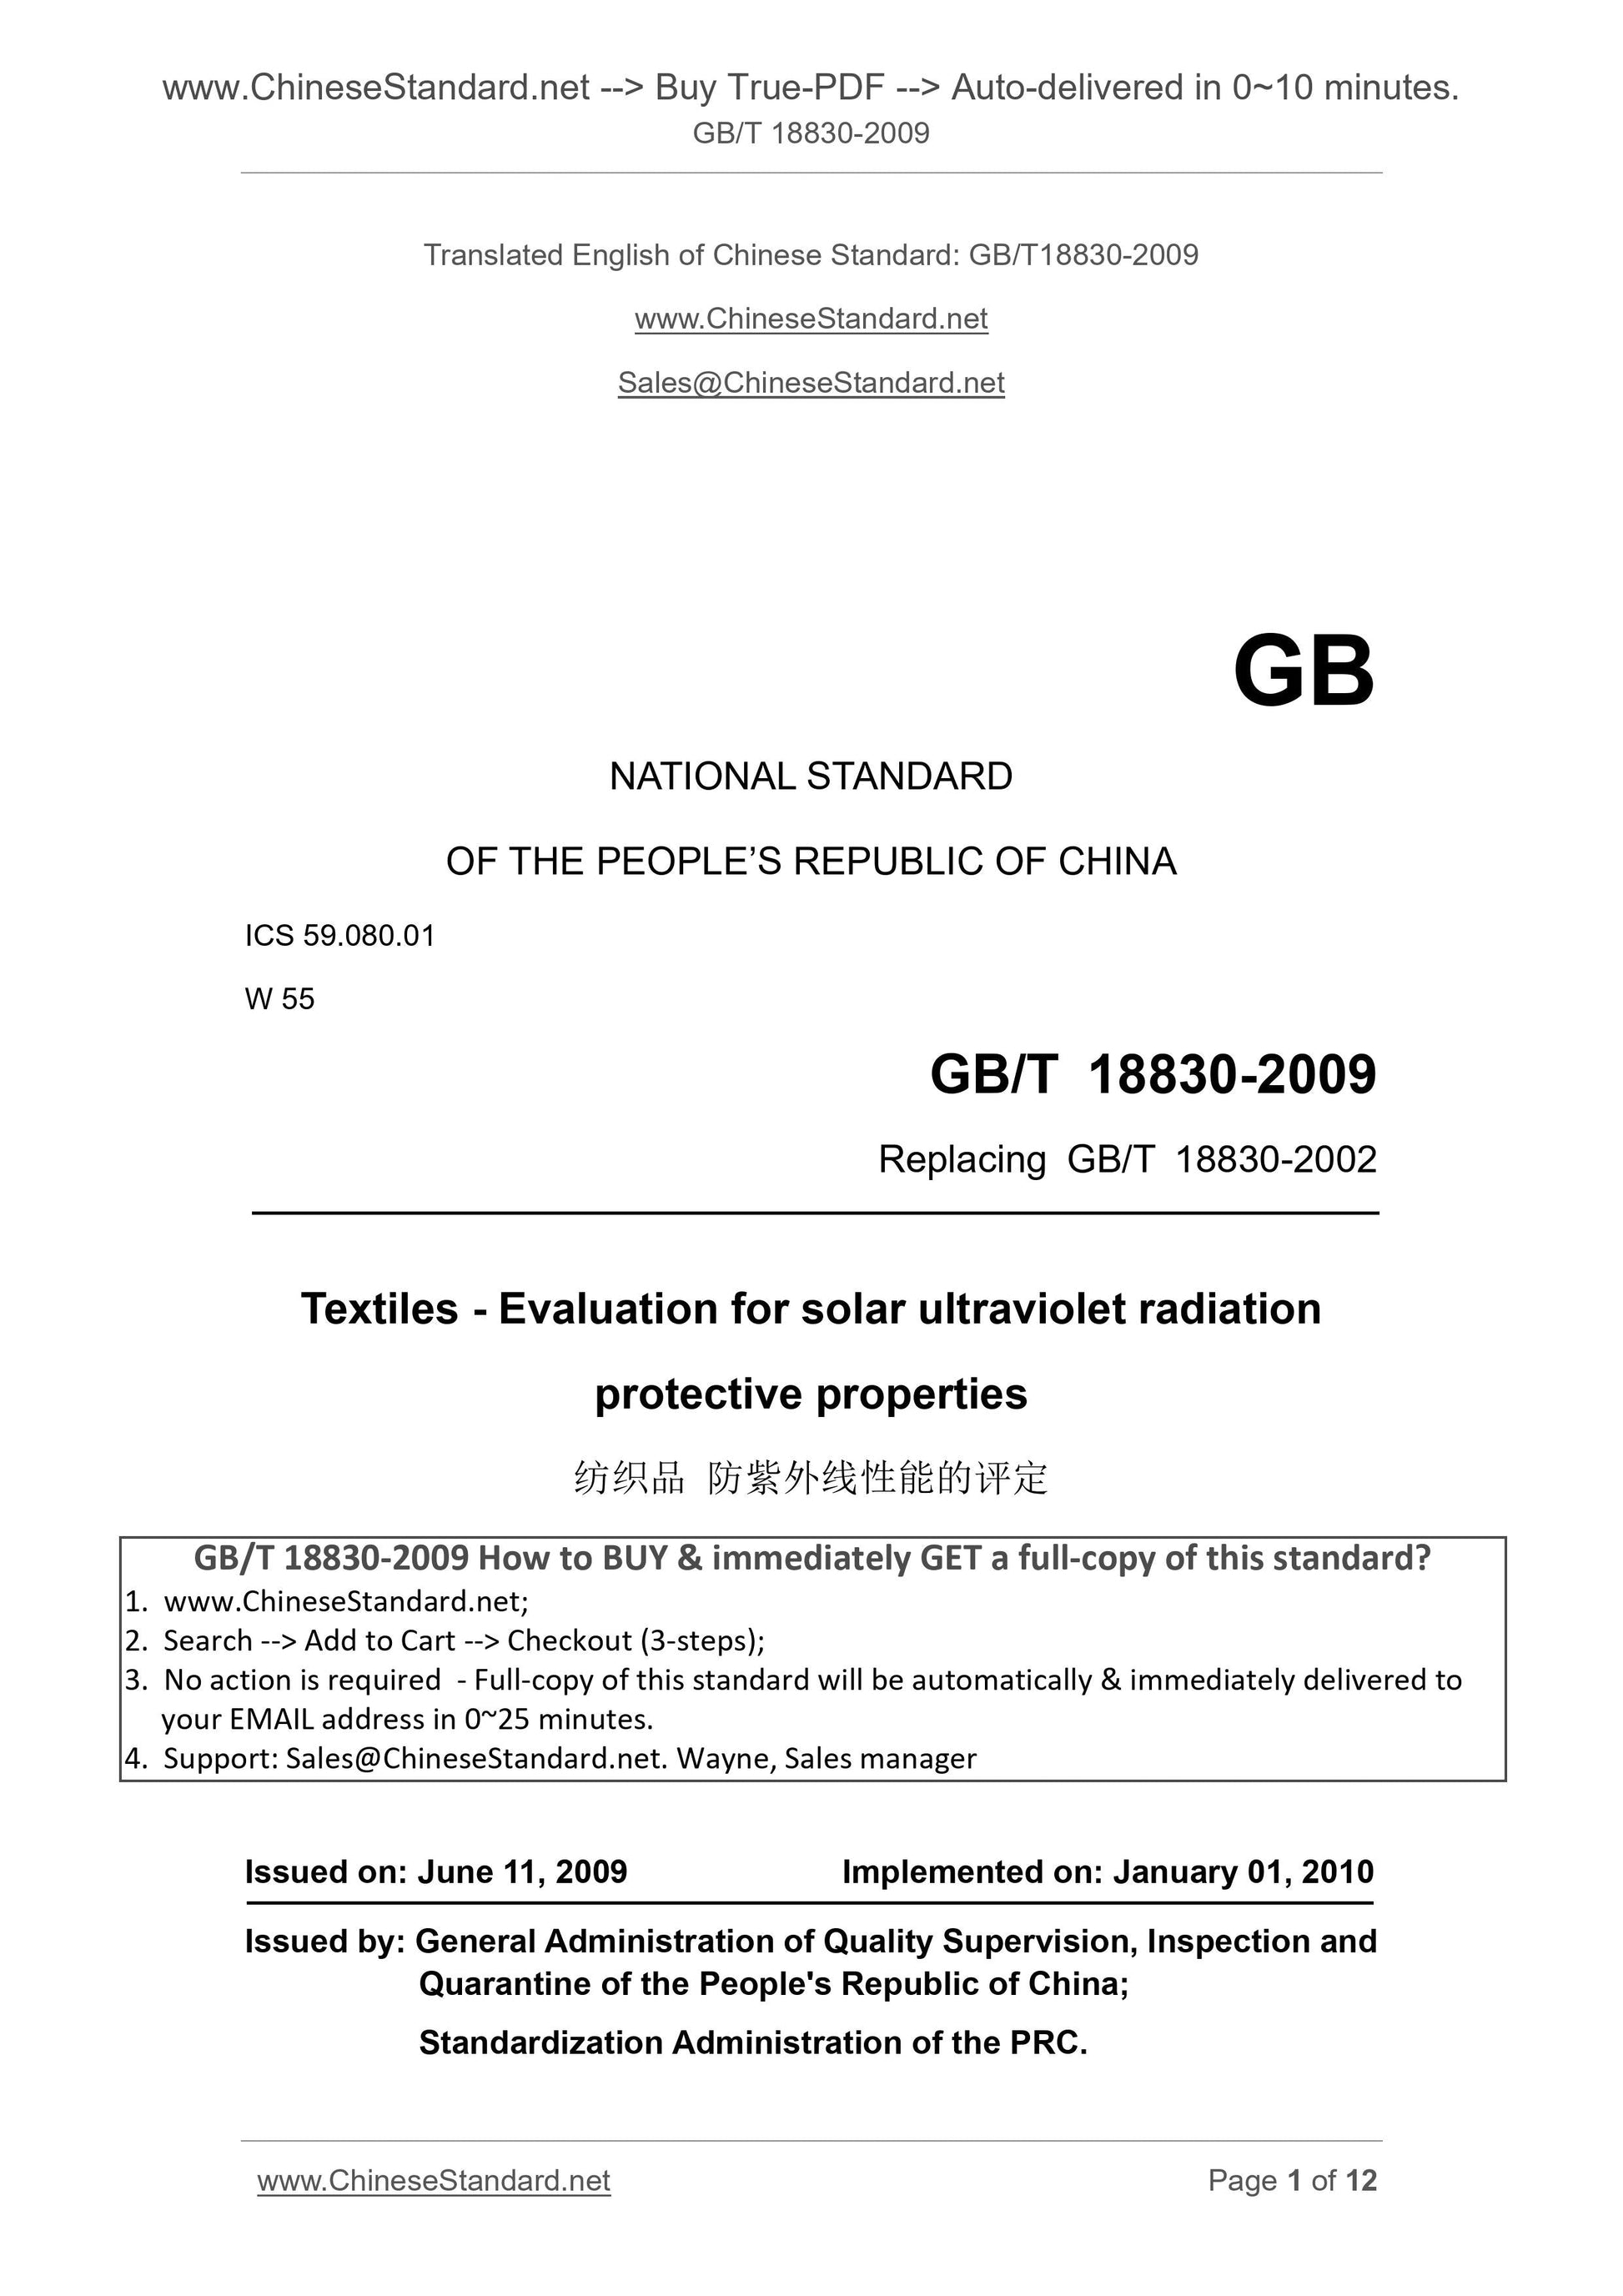 GB/T 18830-2009 Page 1